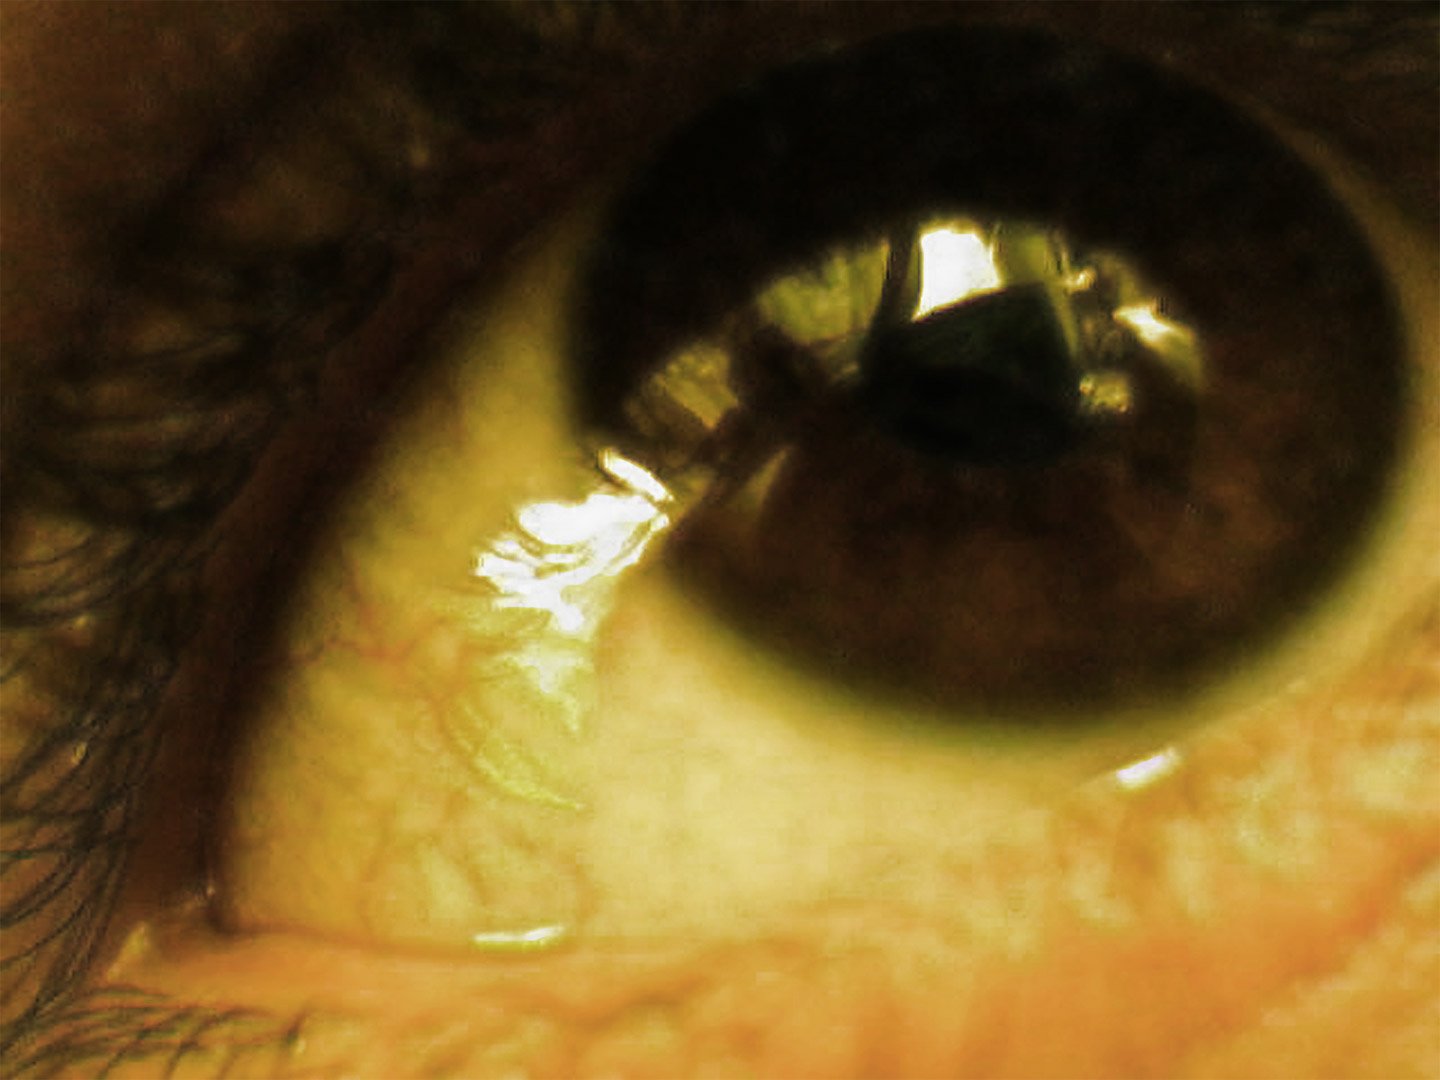 an eye with an iris looking into the camera